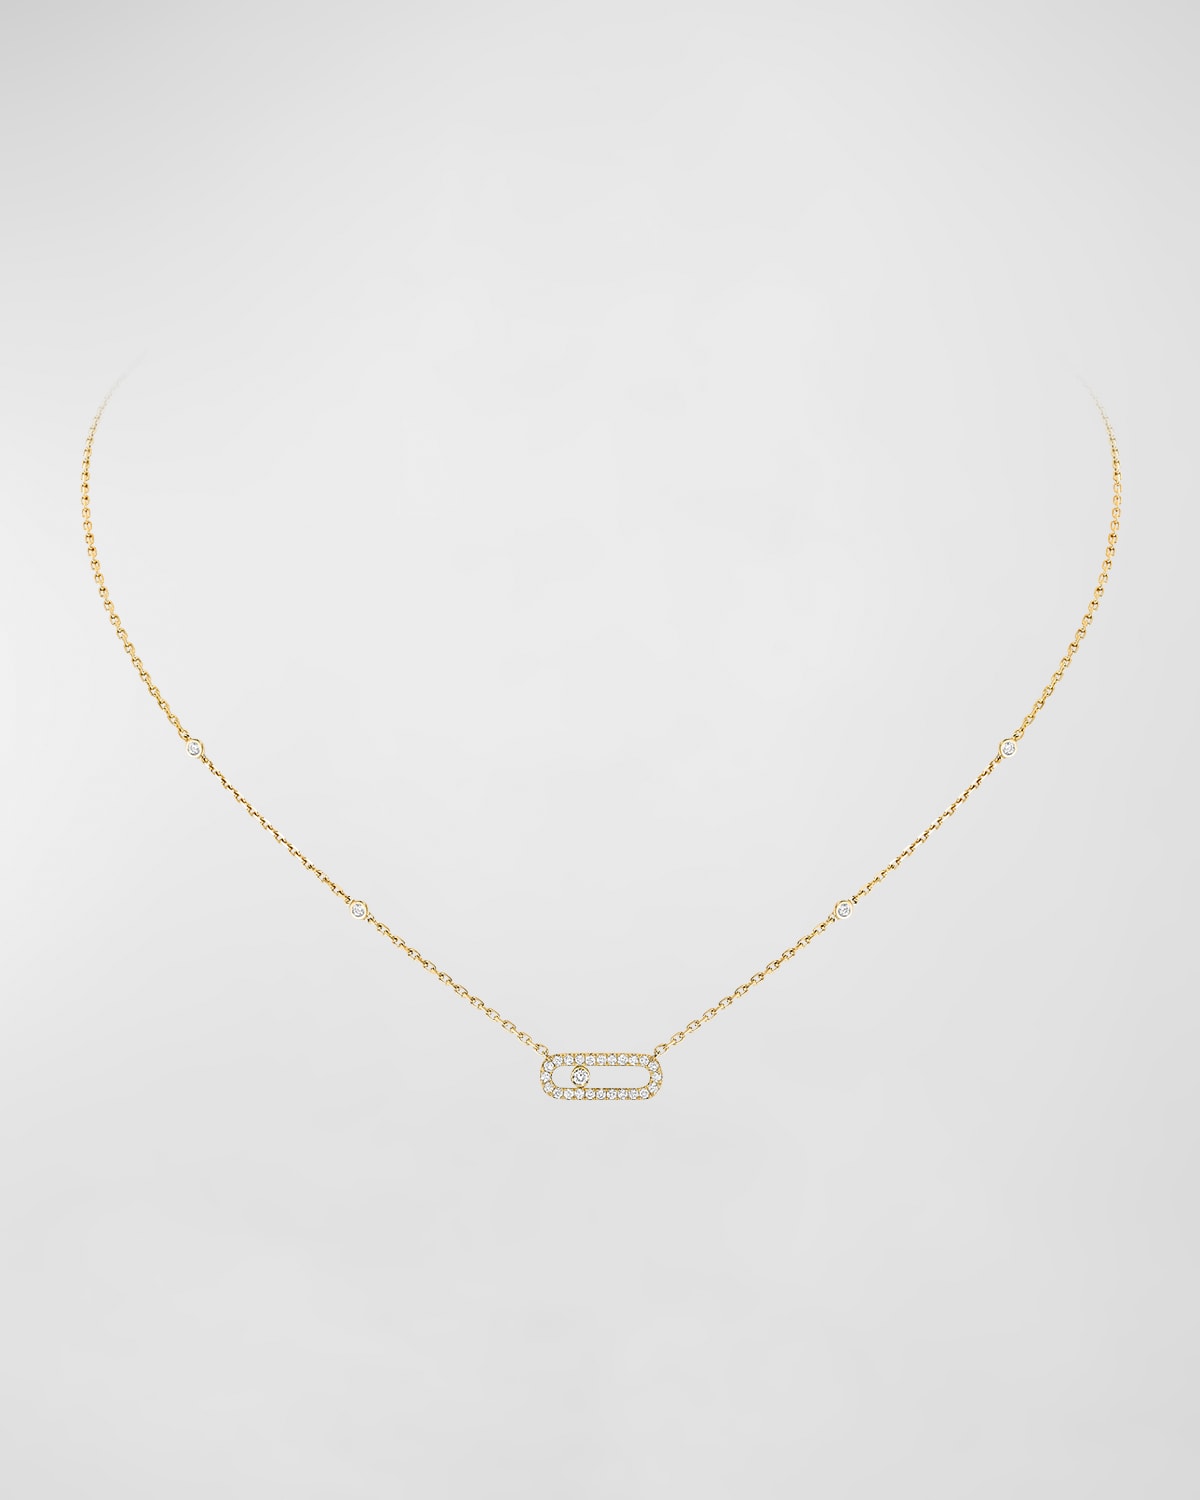 Messika Move Uno 18K Yellow Gold Diamond Pave Necklace